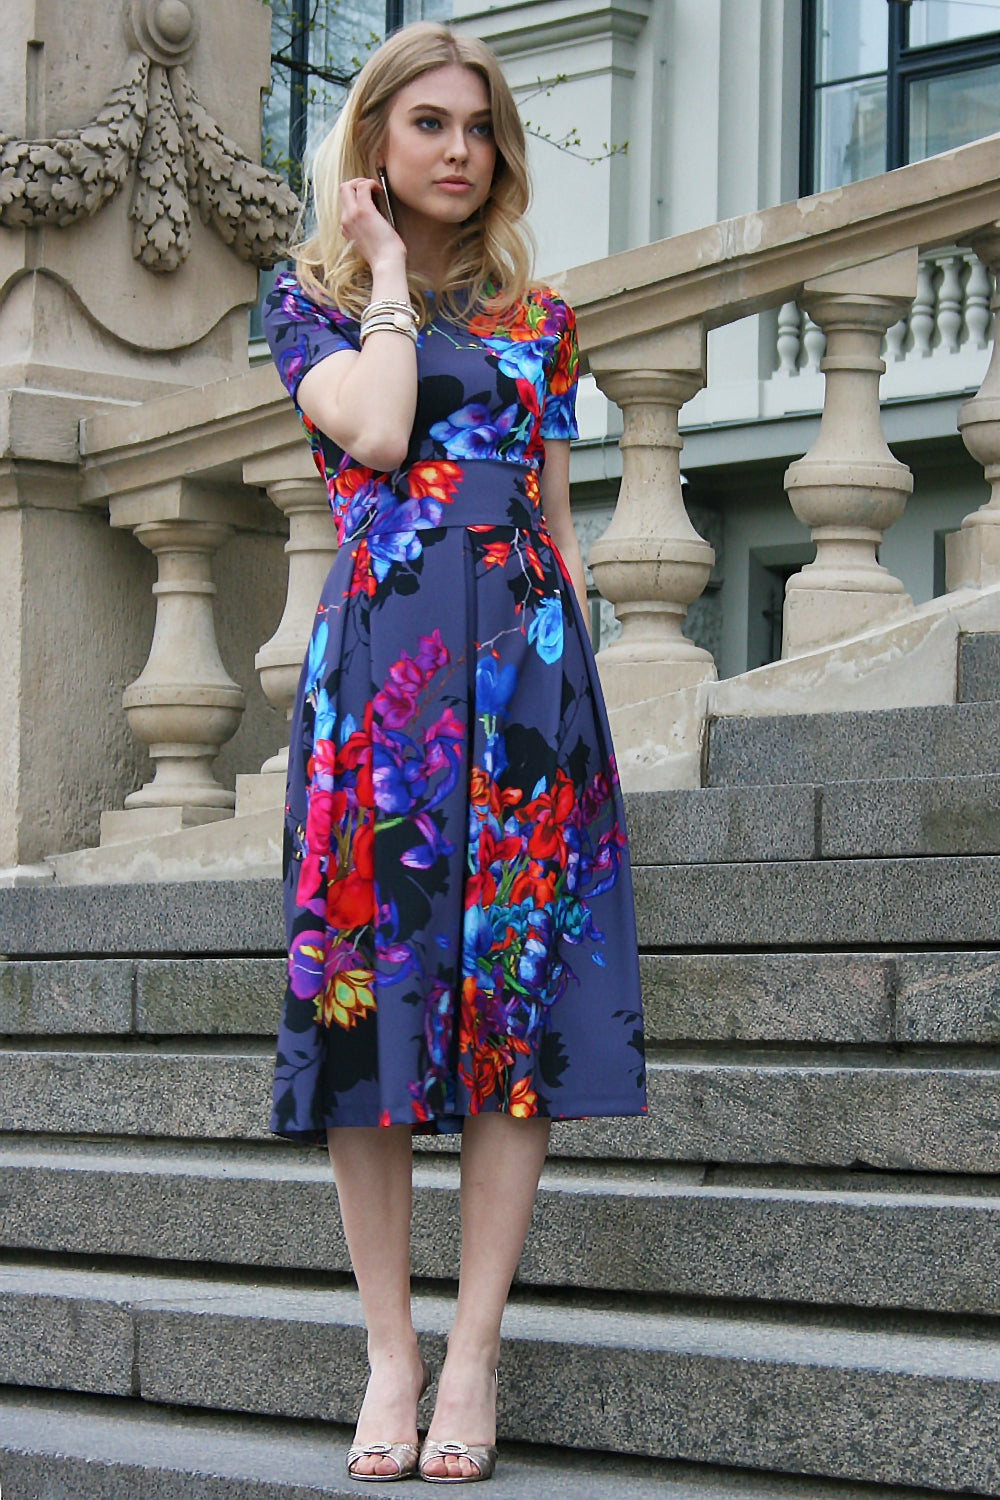 Gray dress with painted bright flowers